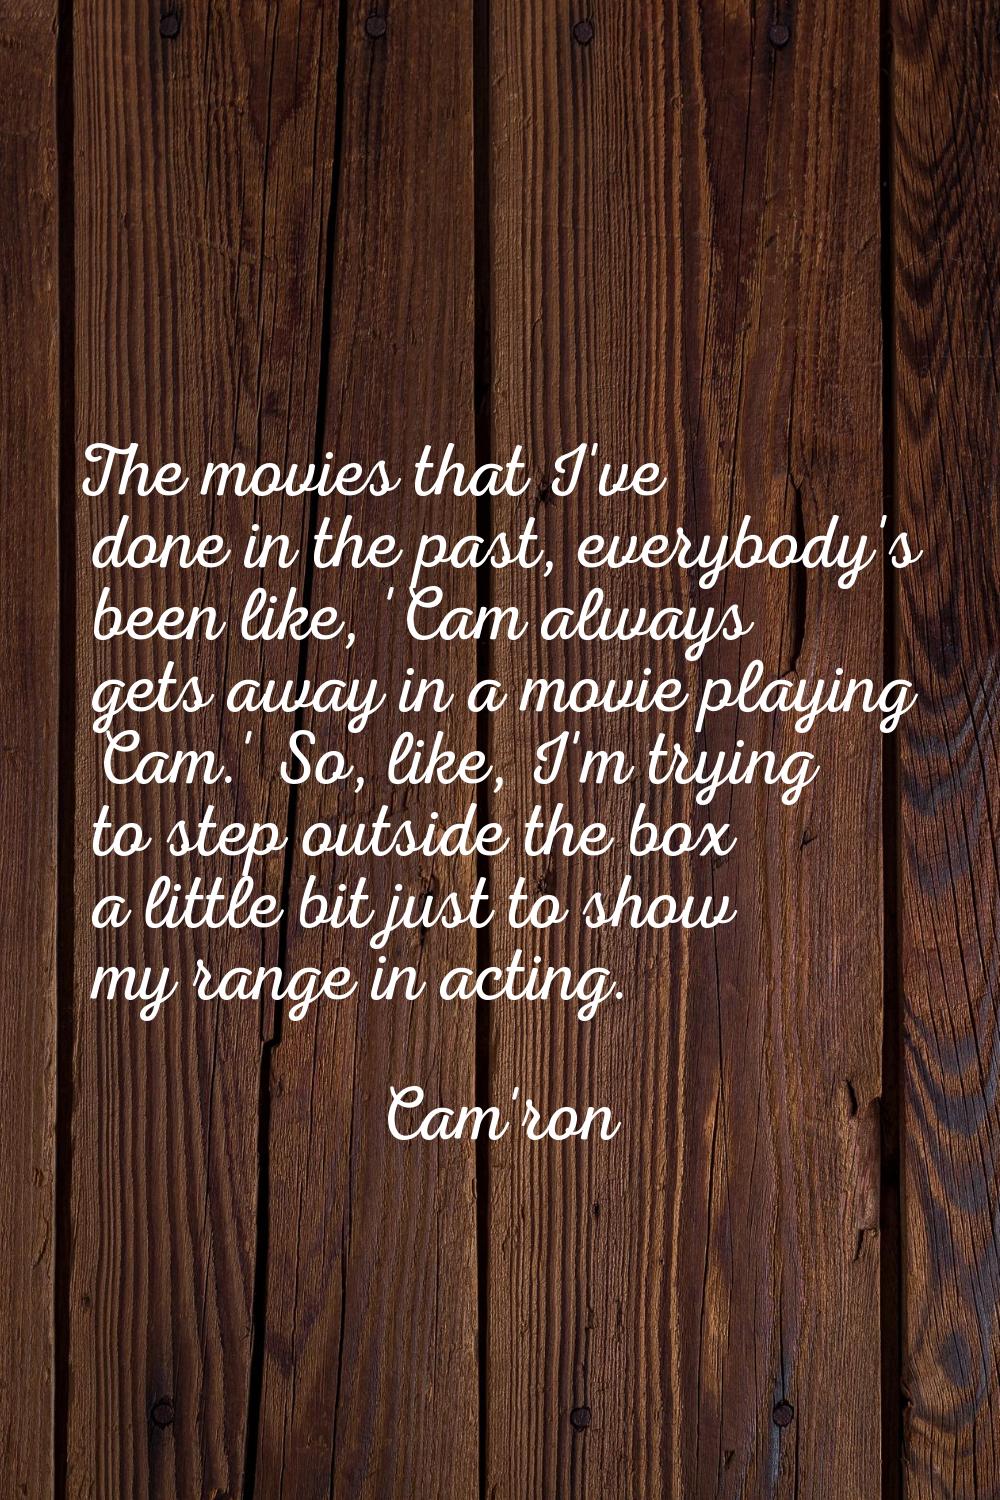 The movies that I've done in the past, everybody's been like, 'Cam always gets away in a movie play